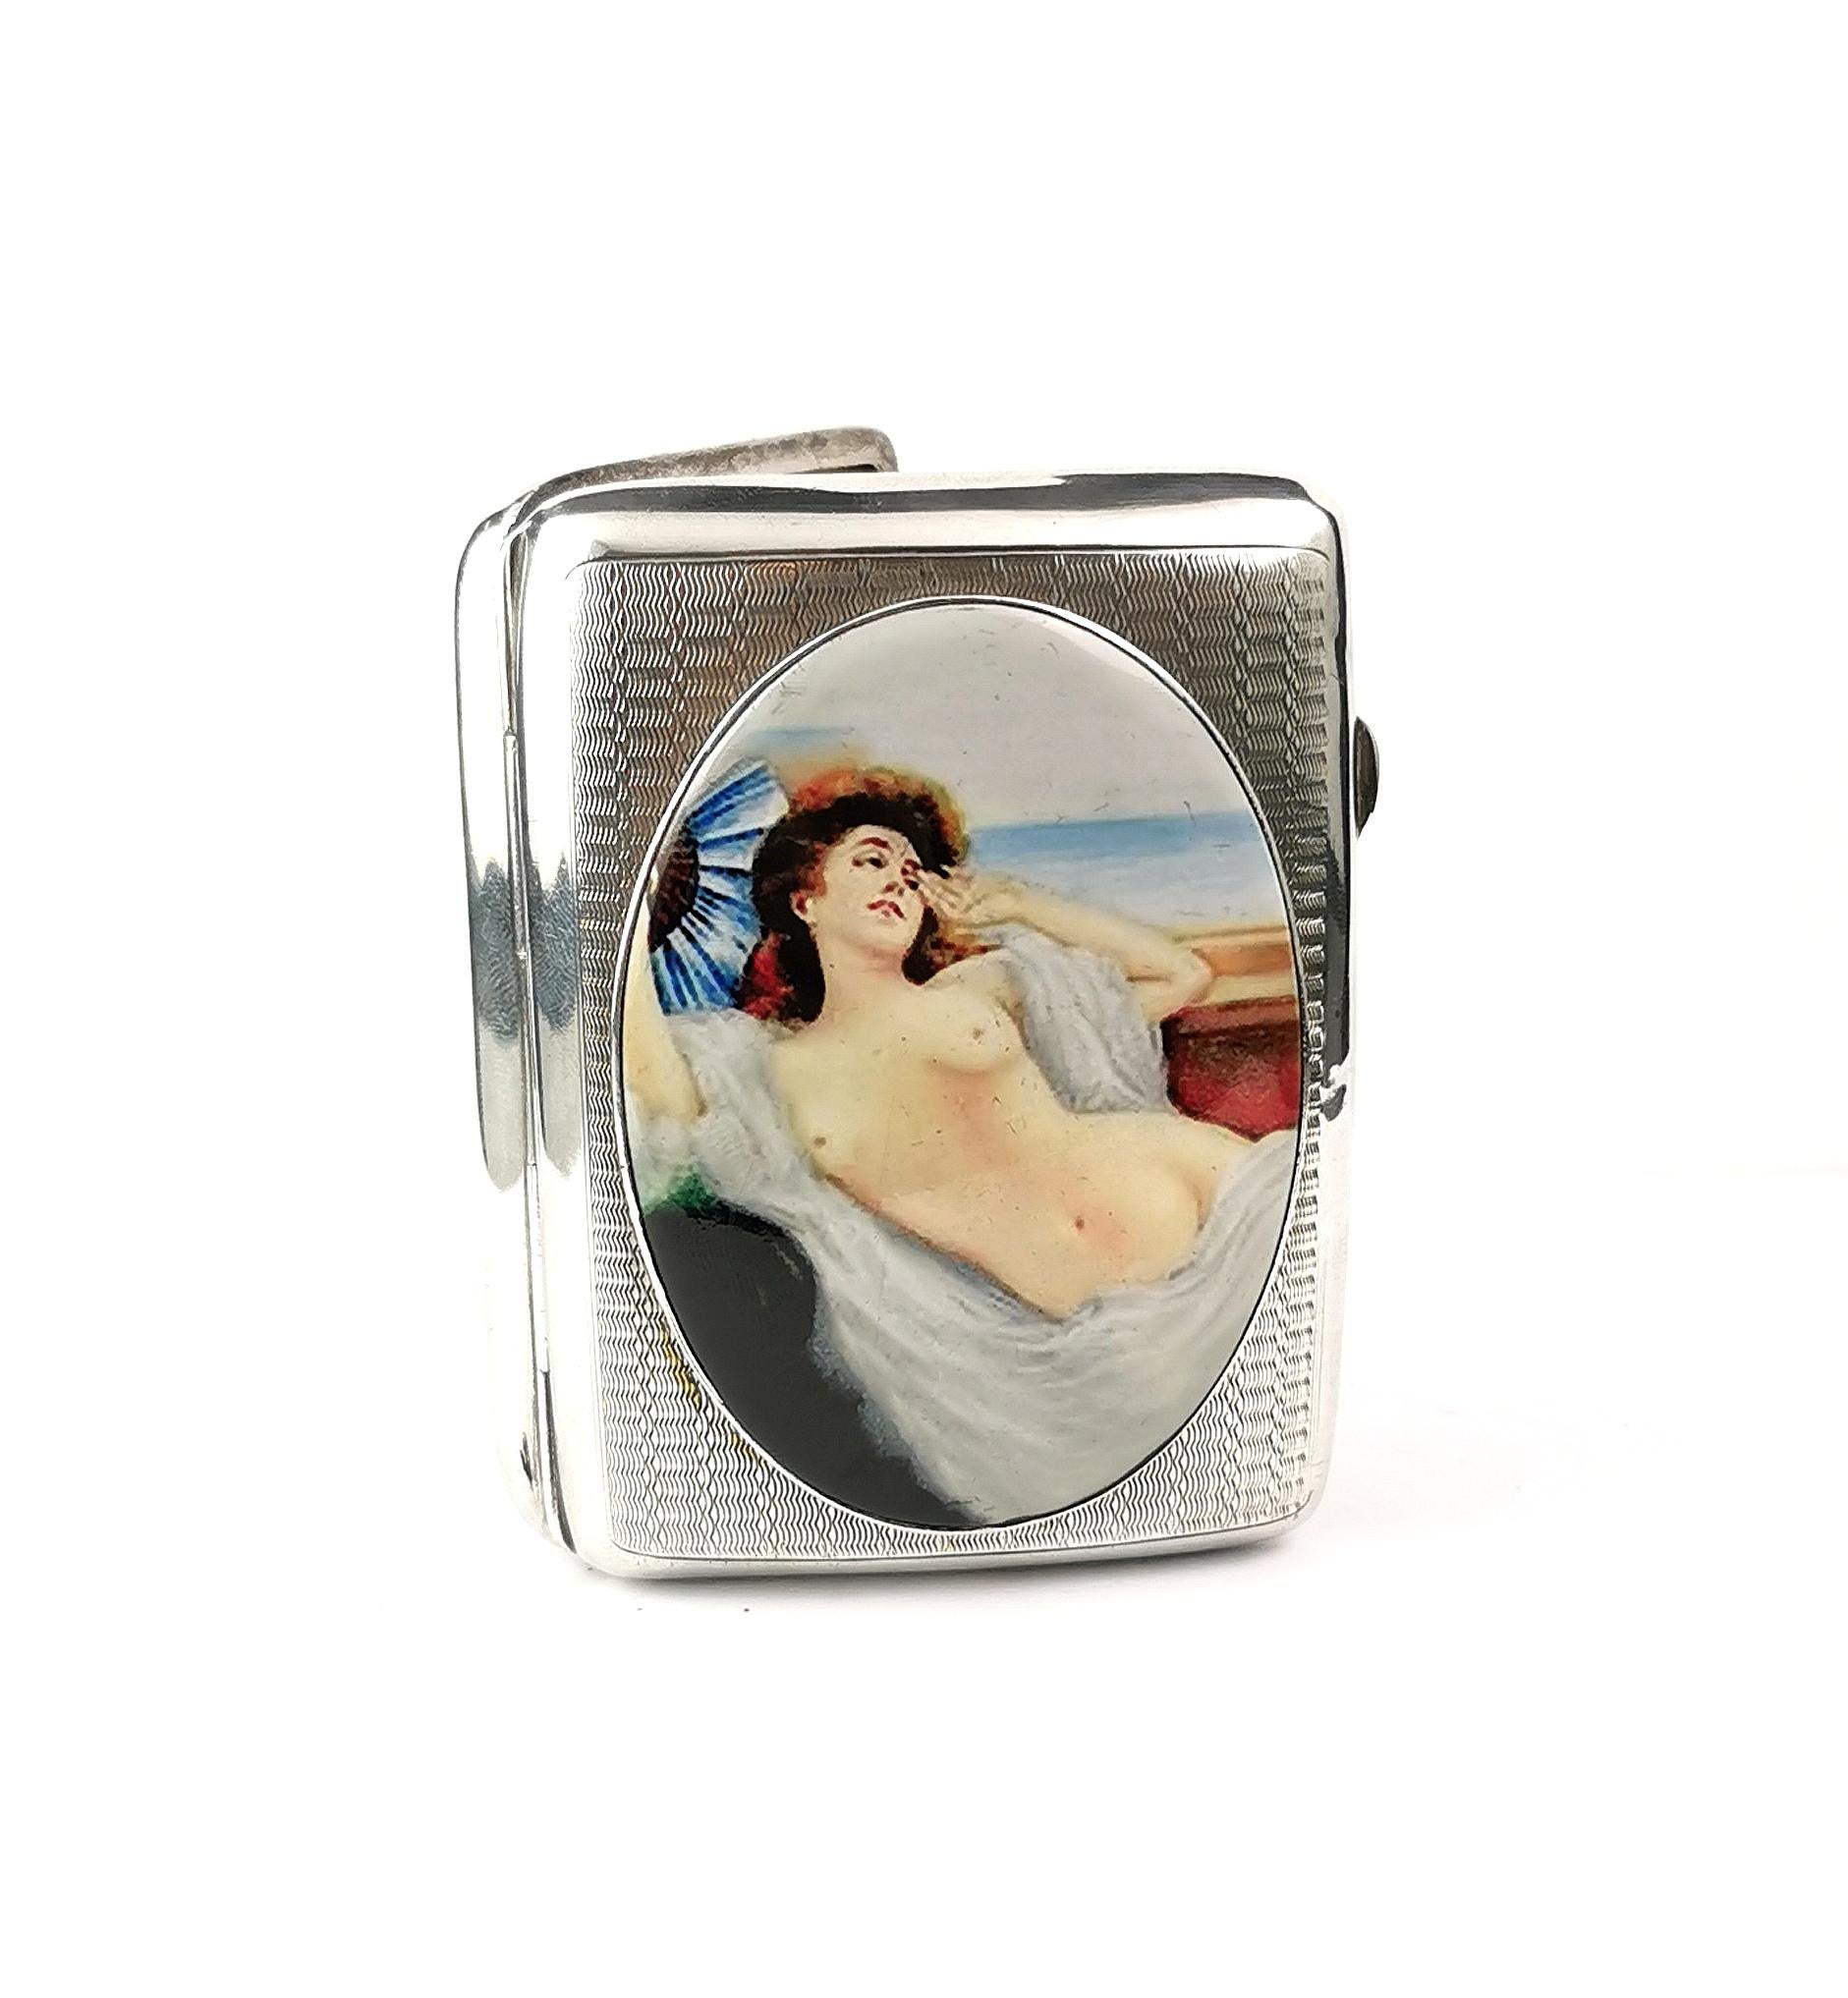 A beautiful vintage Art Deco era sterling silver and enamelled cigarette case.

The case has an erotic theme and features a lady topless in a reclined position with a fan and a gown.

The enamelled oval to the front is in good condition with no